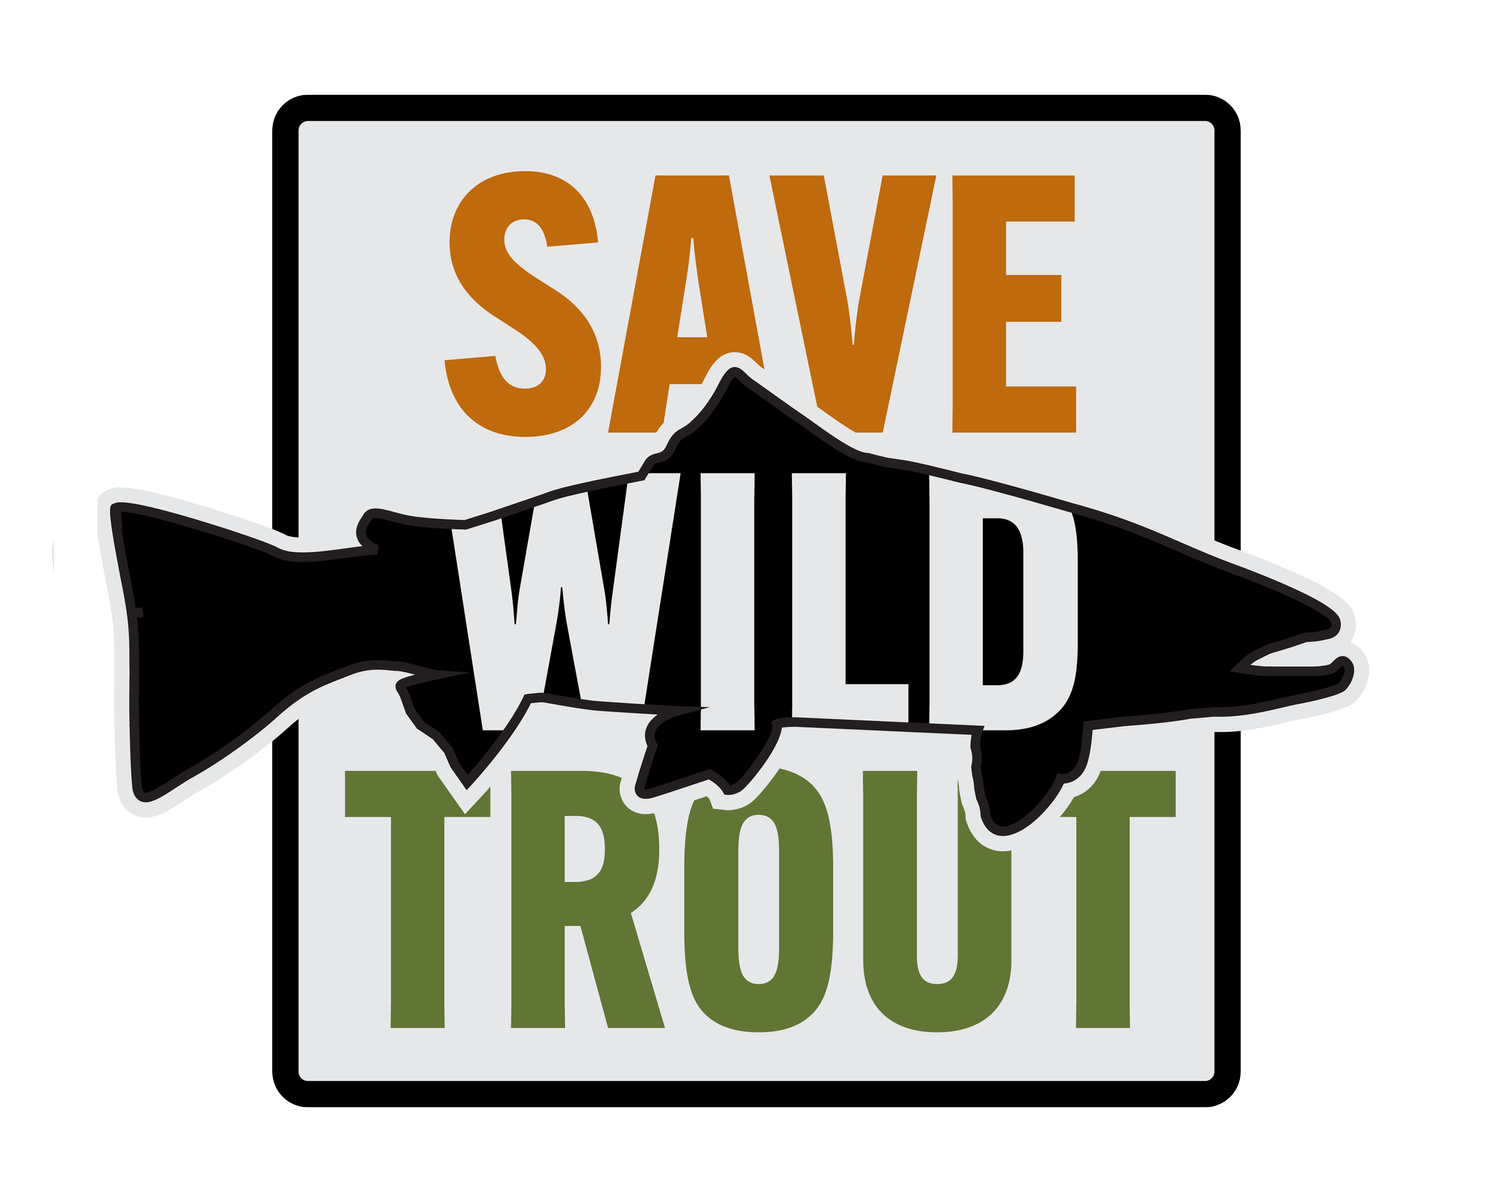 SAVE WILD TROUT